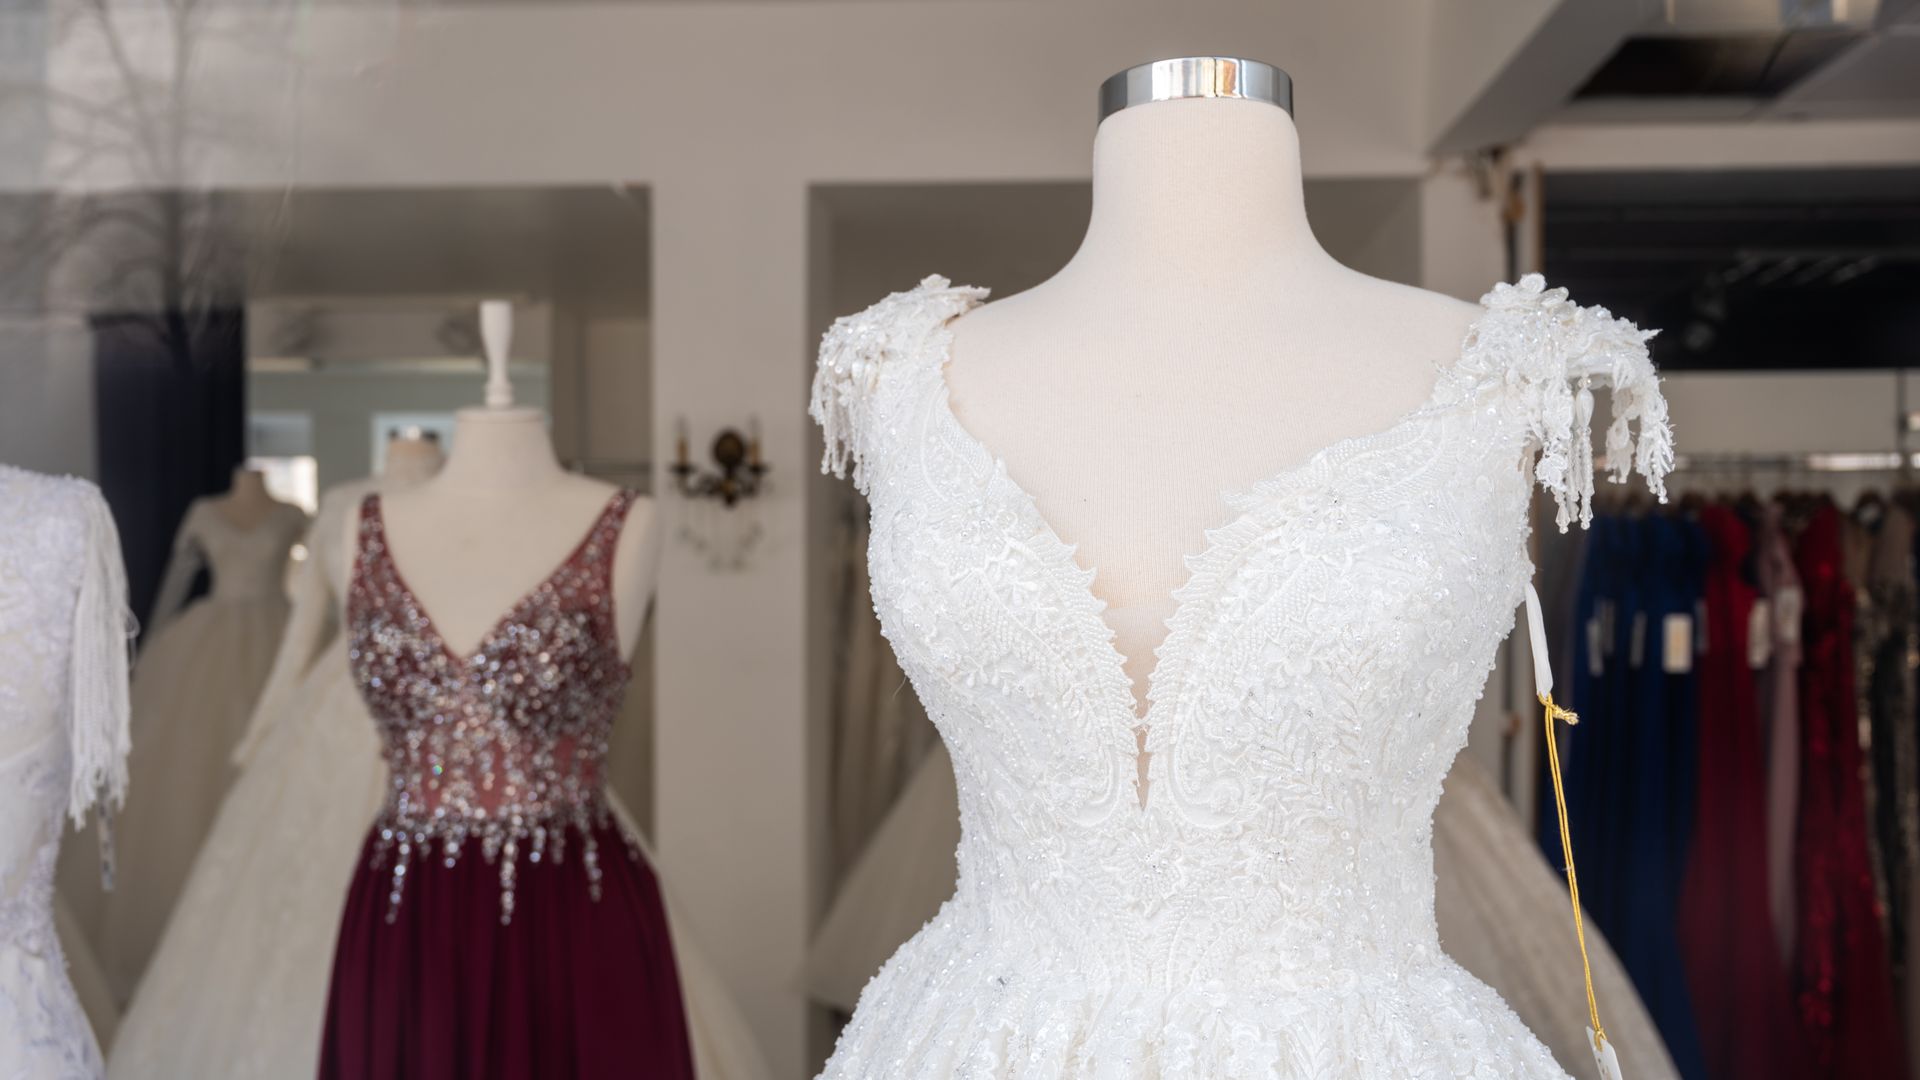 A wedding dress in a storefront.